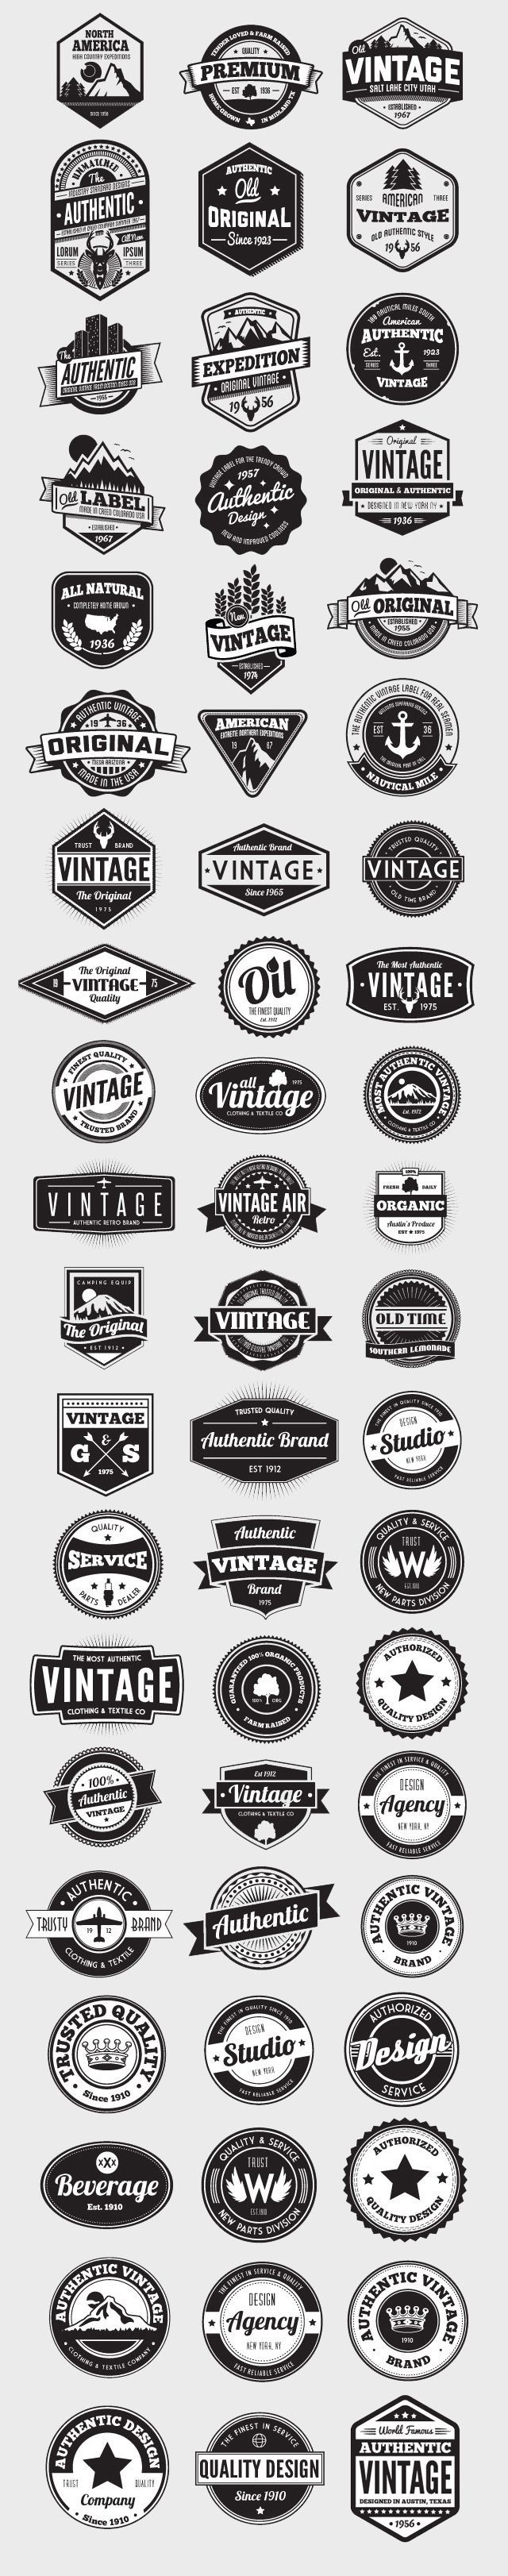 Having a good selection of vectors on hand is essential for any designer. This ultimate collection of 60 vector badges and logos